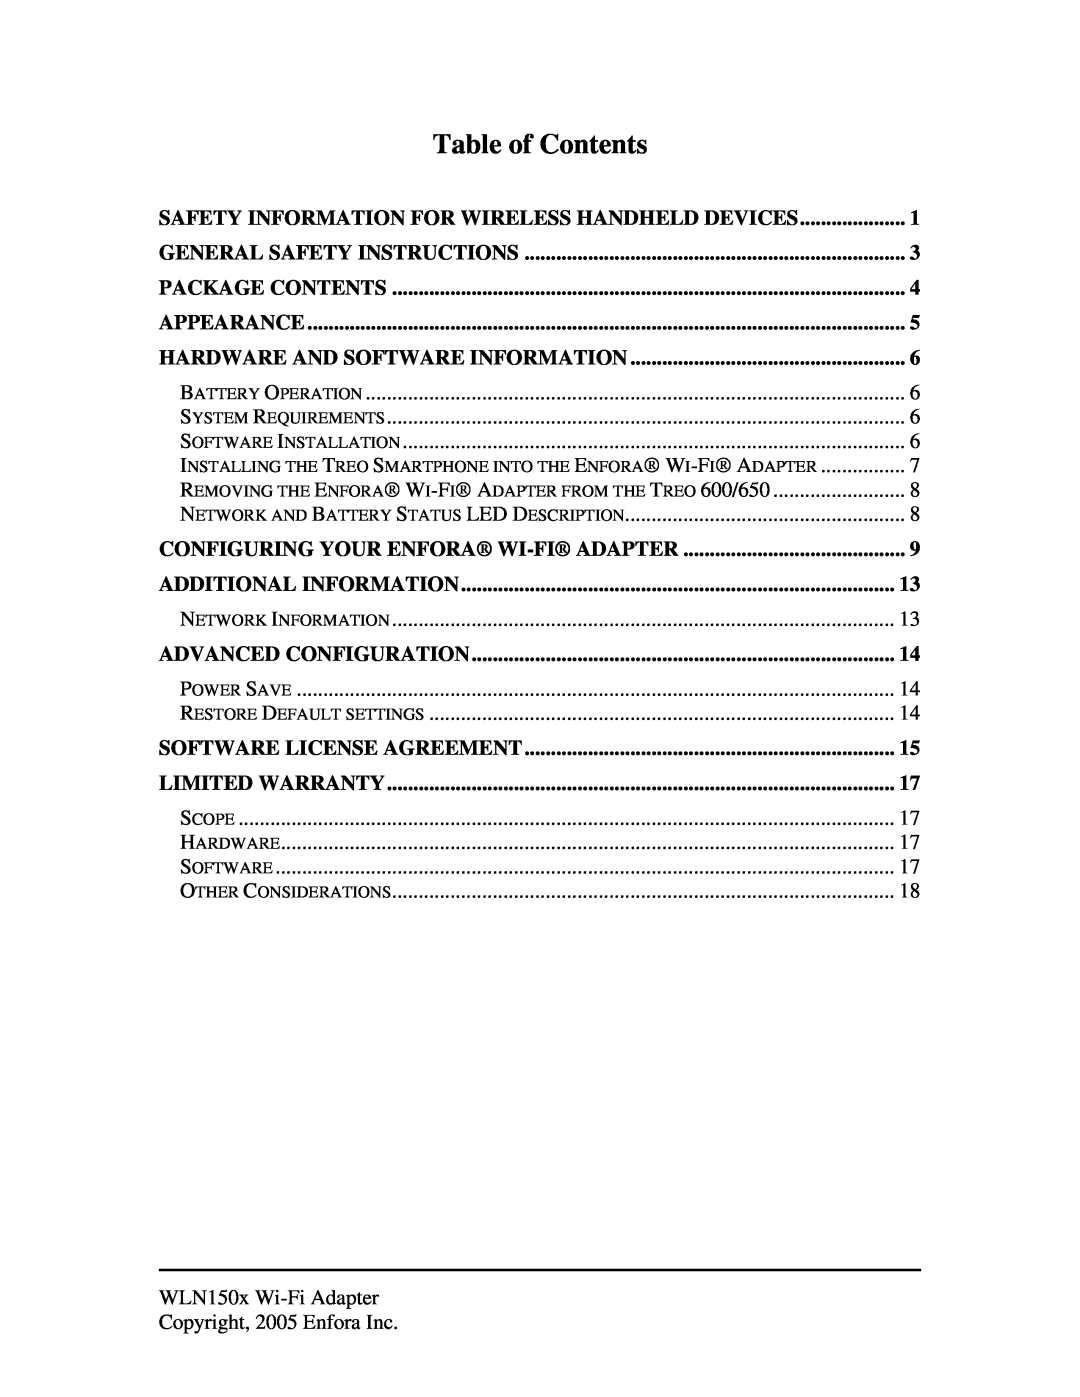 Enfora 600/650 manual Table of Contents 